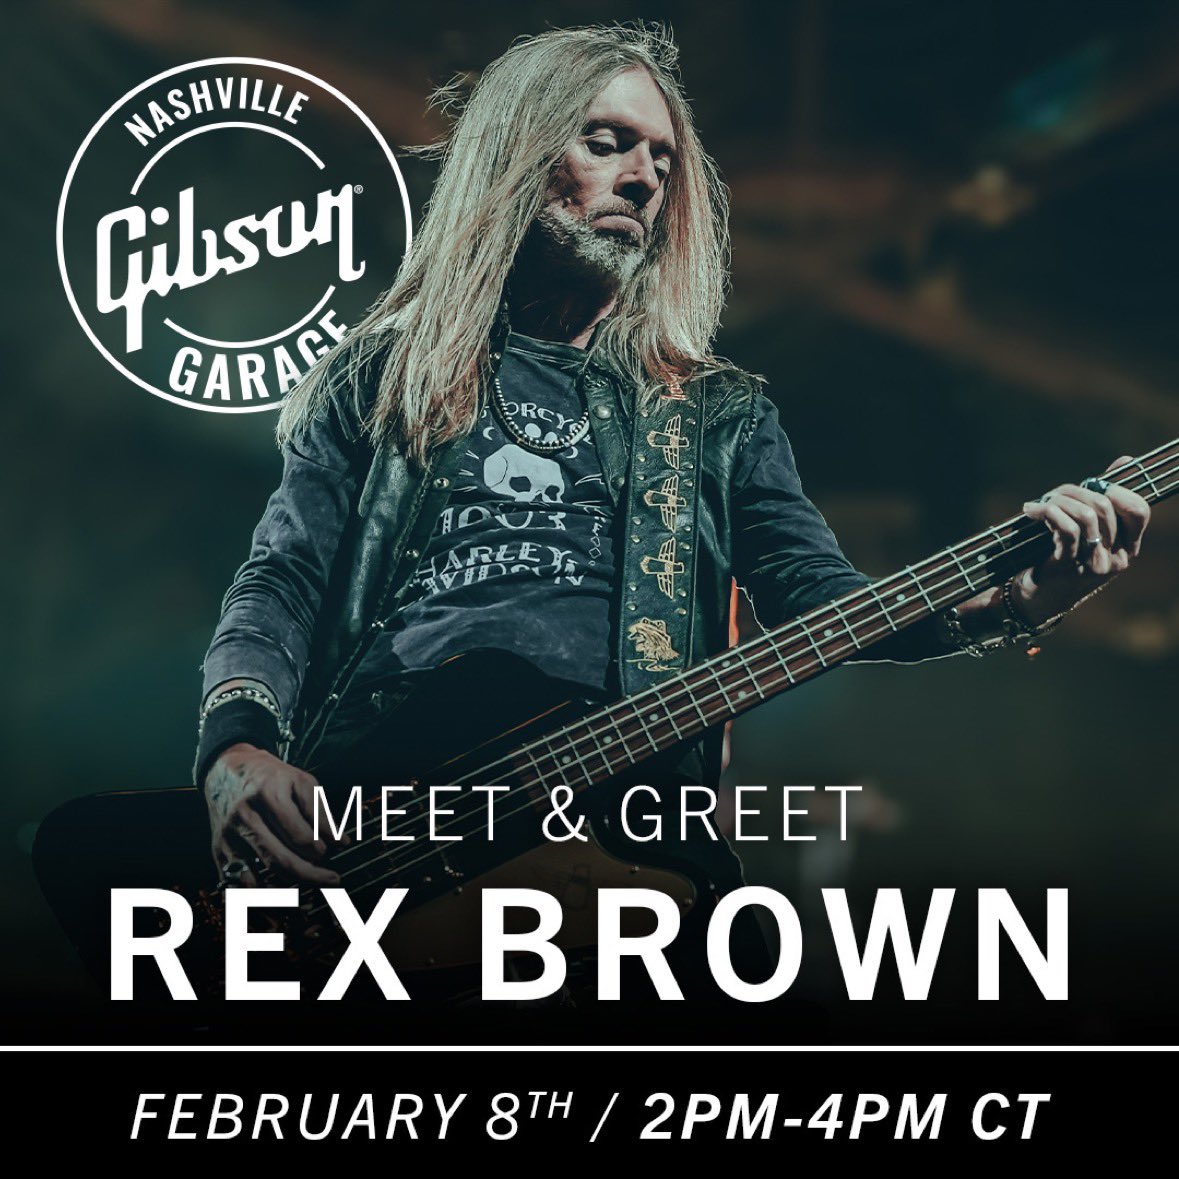 Join us at @GibsonGarage Tuesday, February 8 from 2:00-4:00pm CT for a Meet & Greet and Signing with Rex Brown!